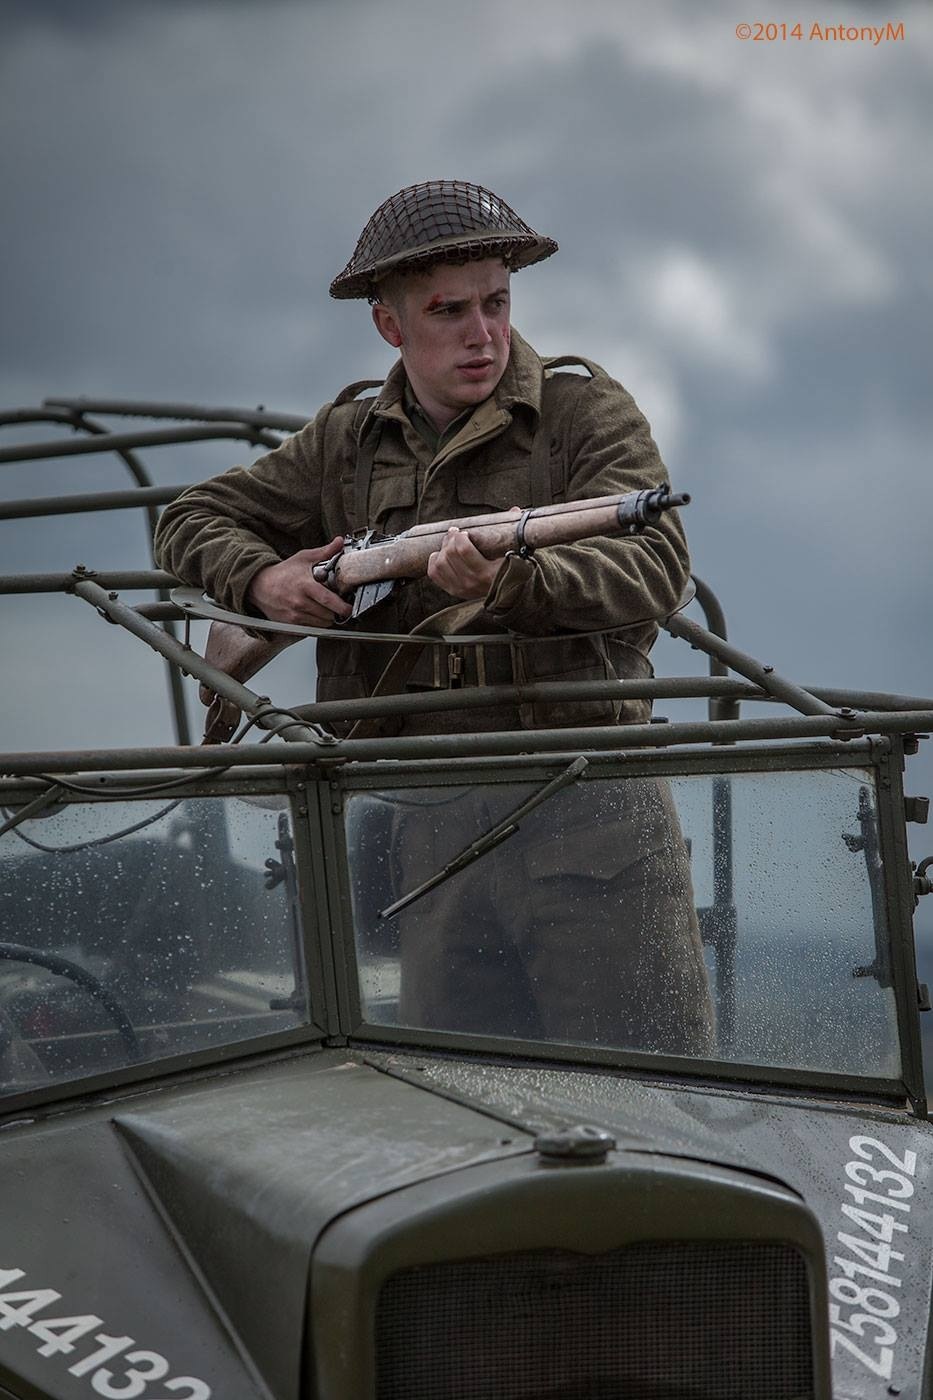 Still from WW2 film 'Our Father'.